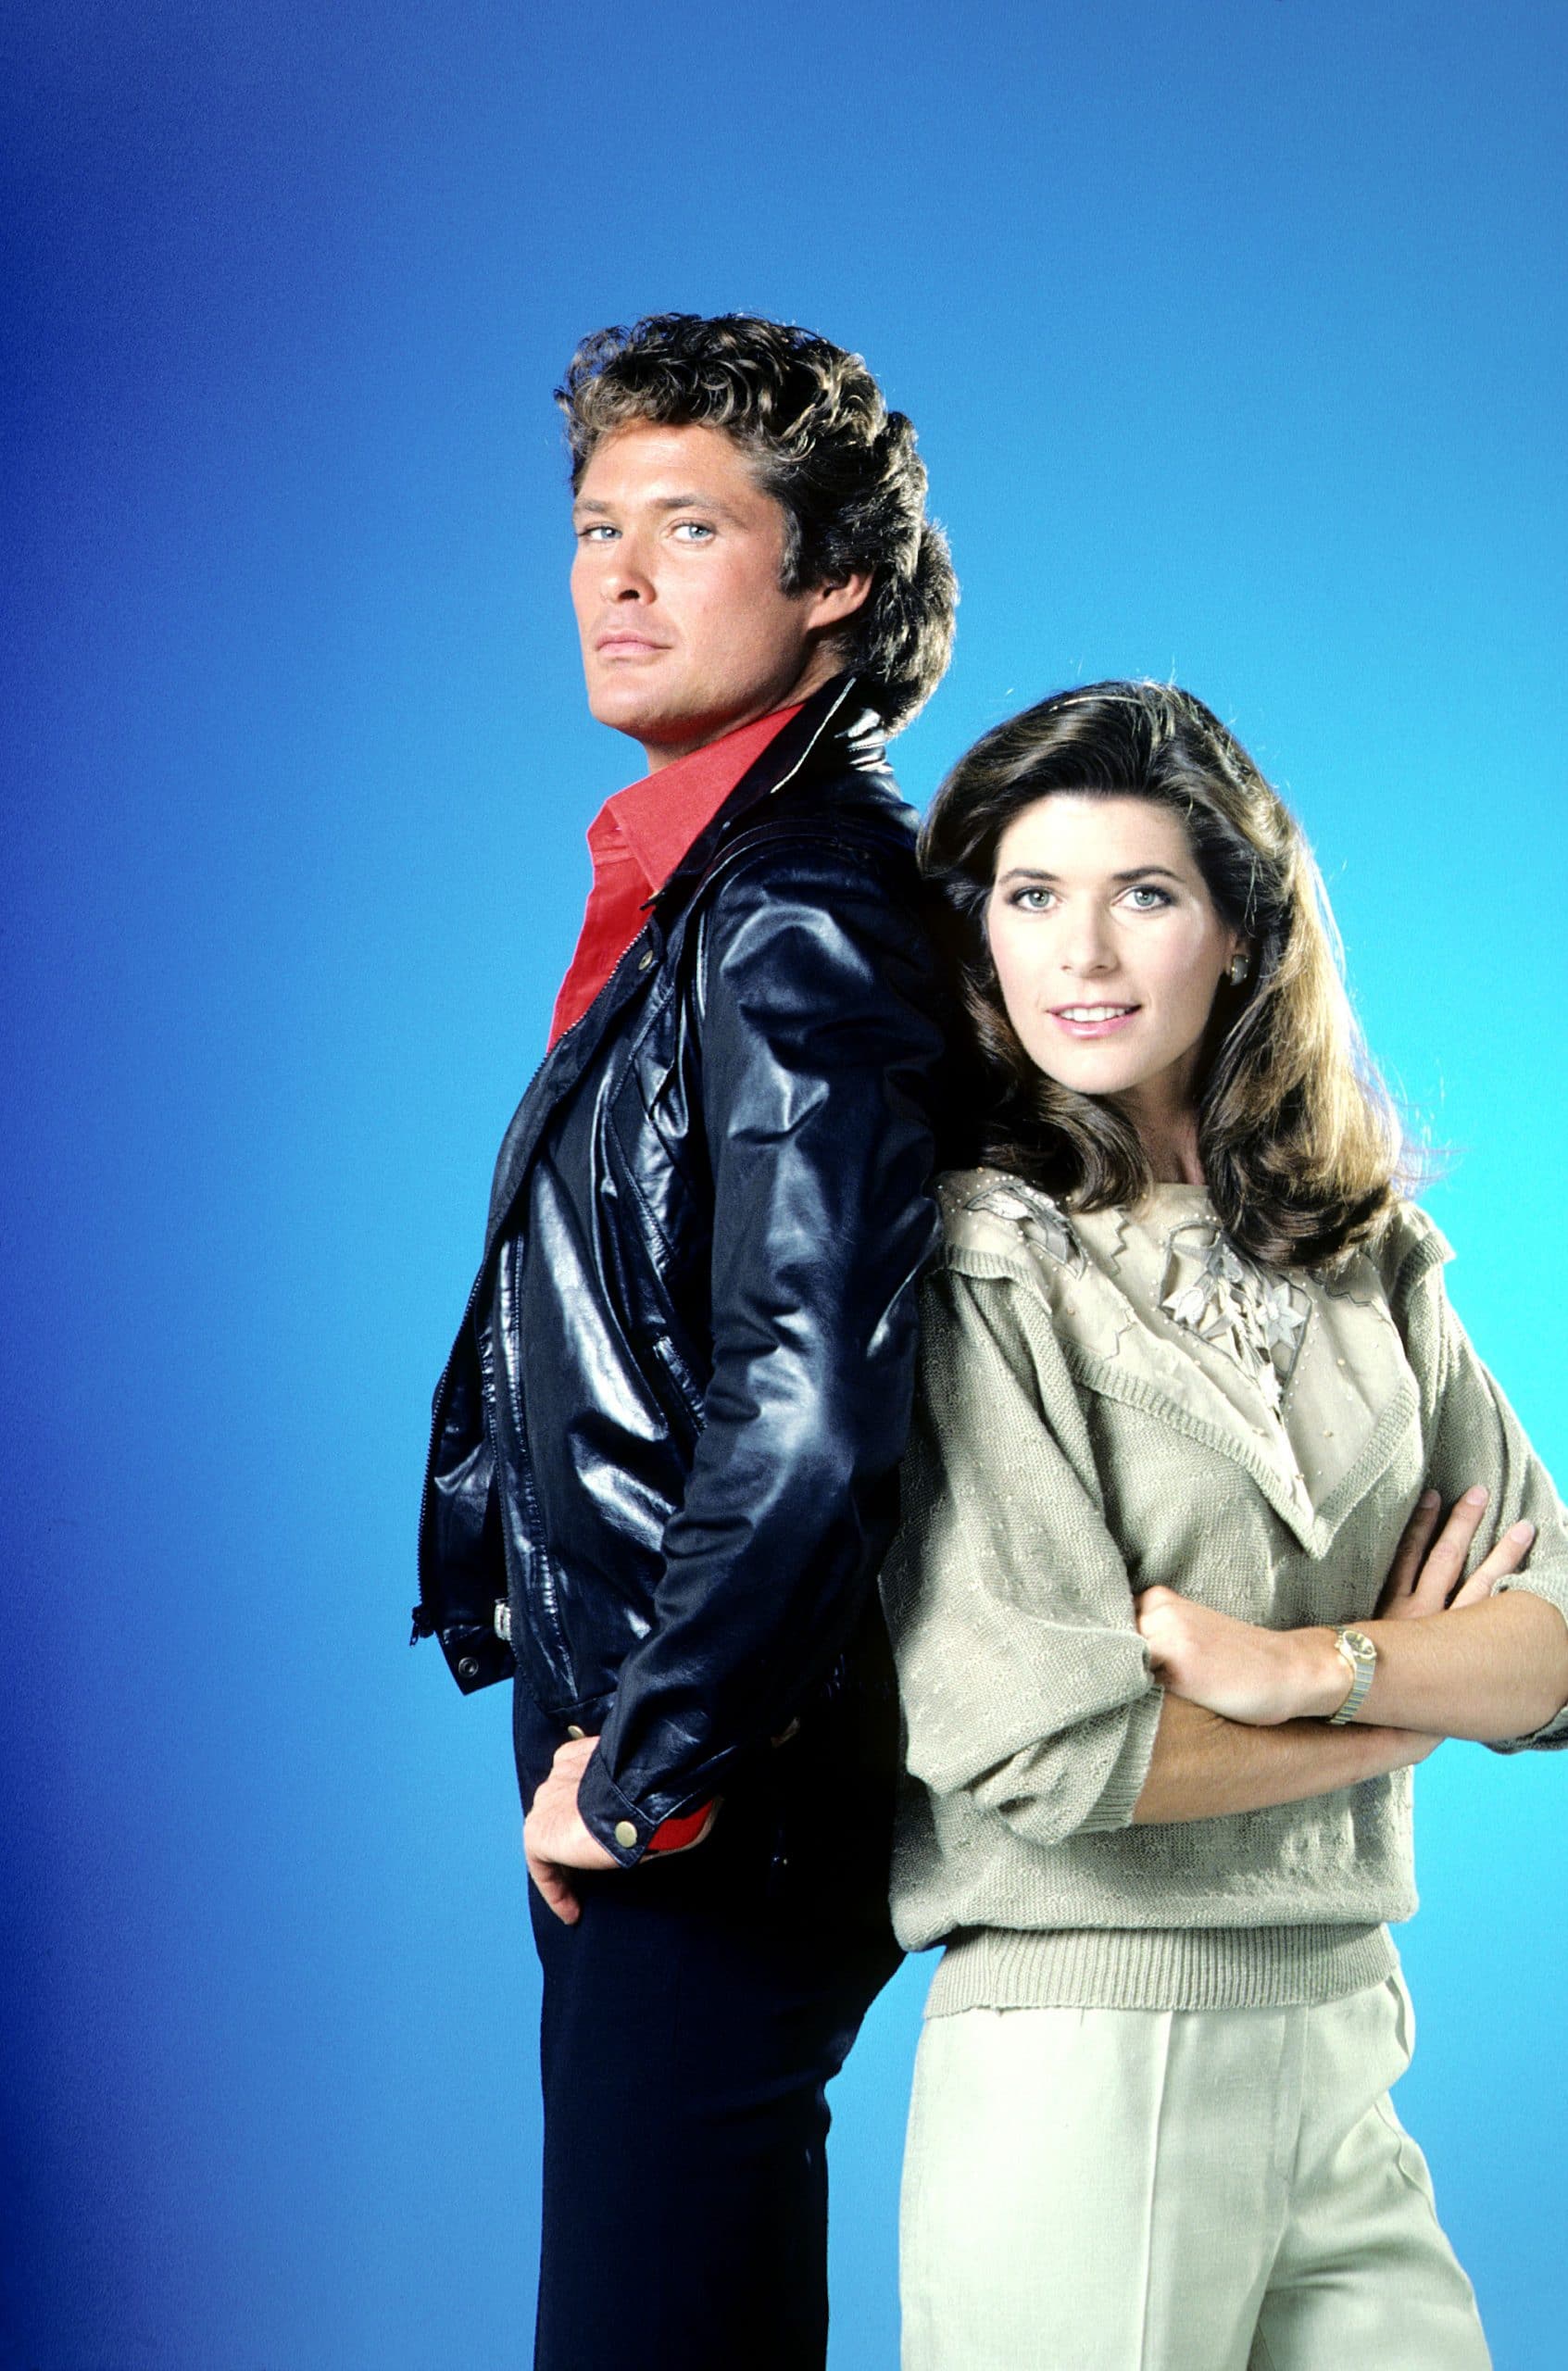 The Cast Of The Original 'Knight Rider' Then And Now 2021